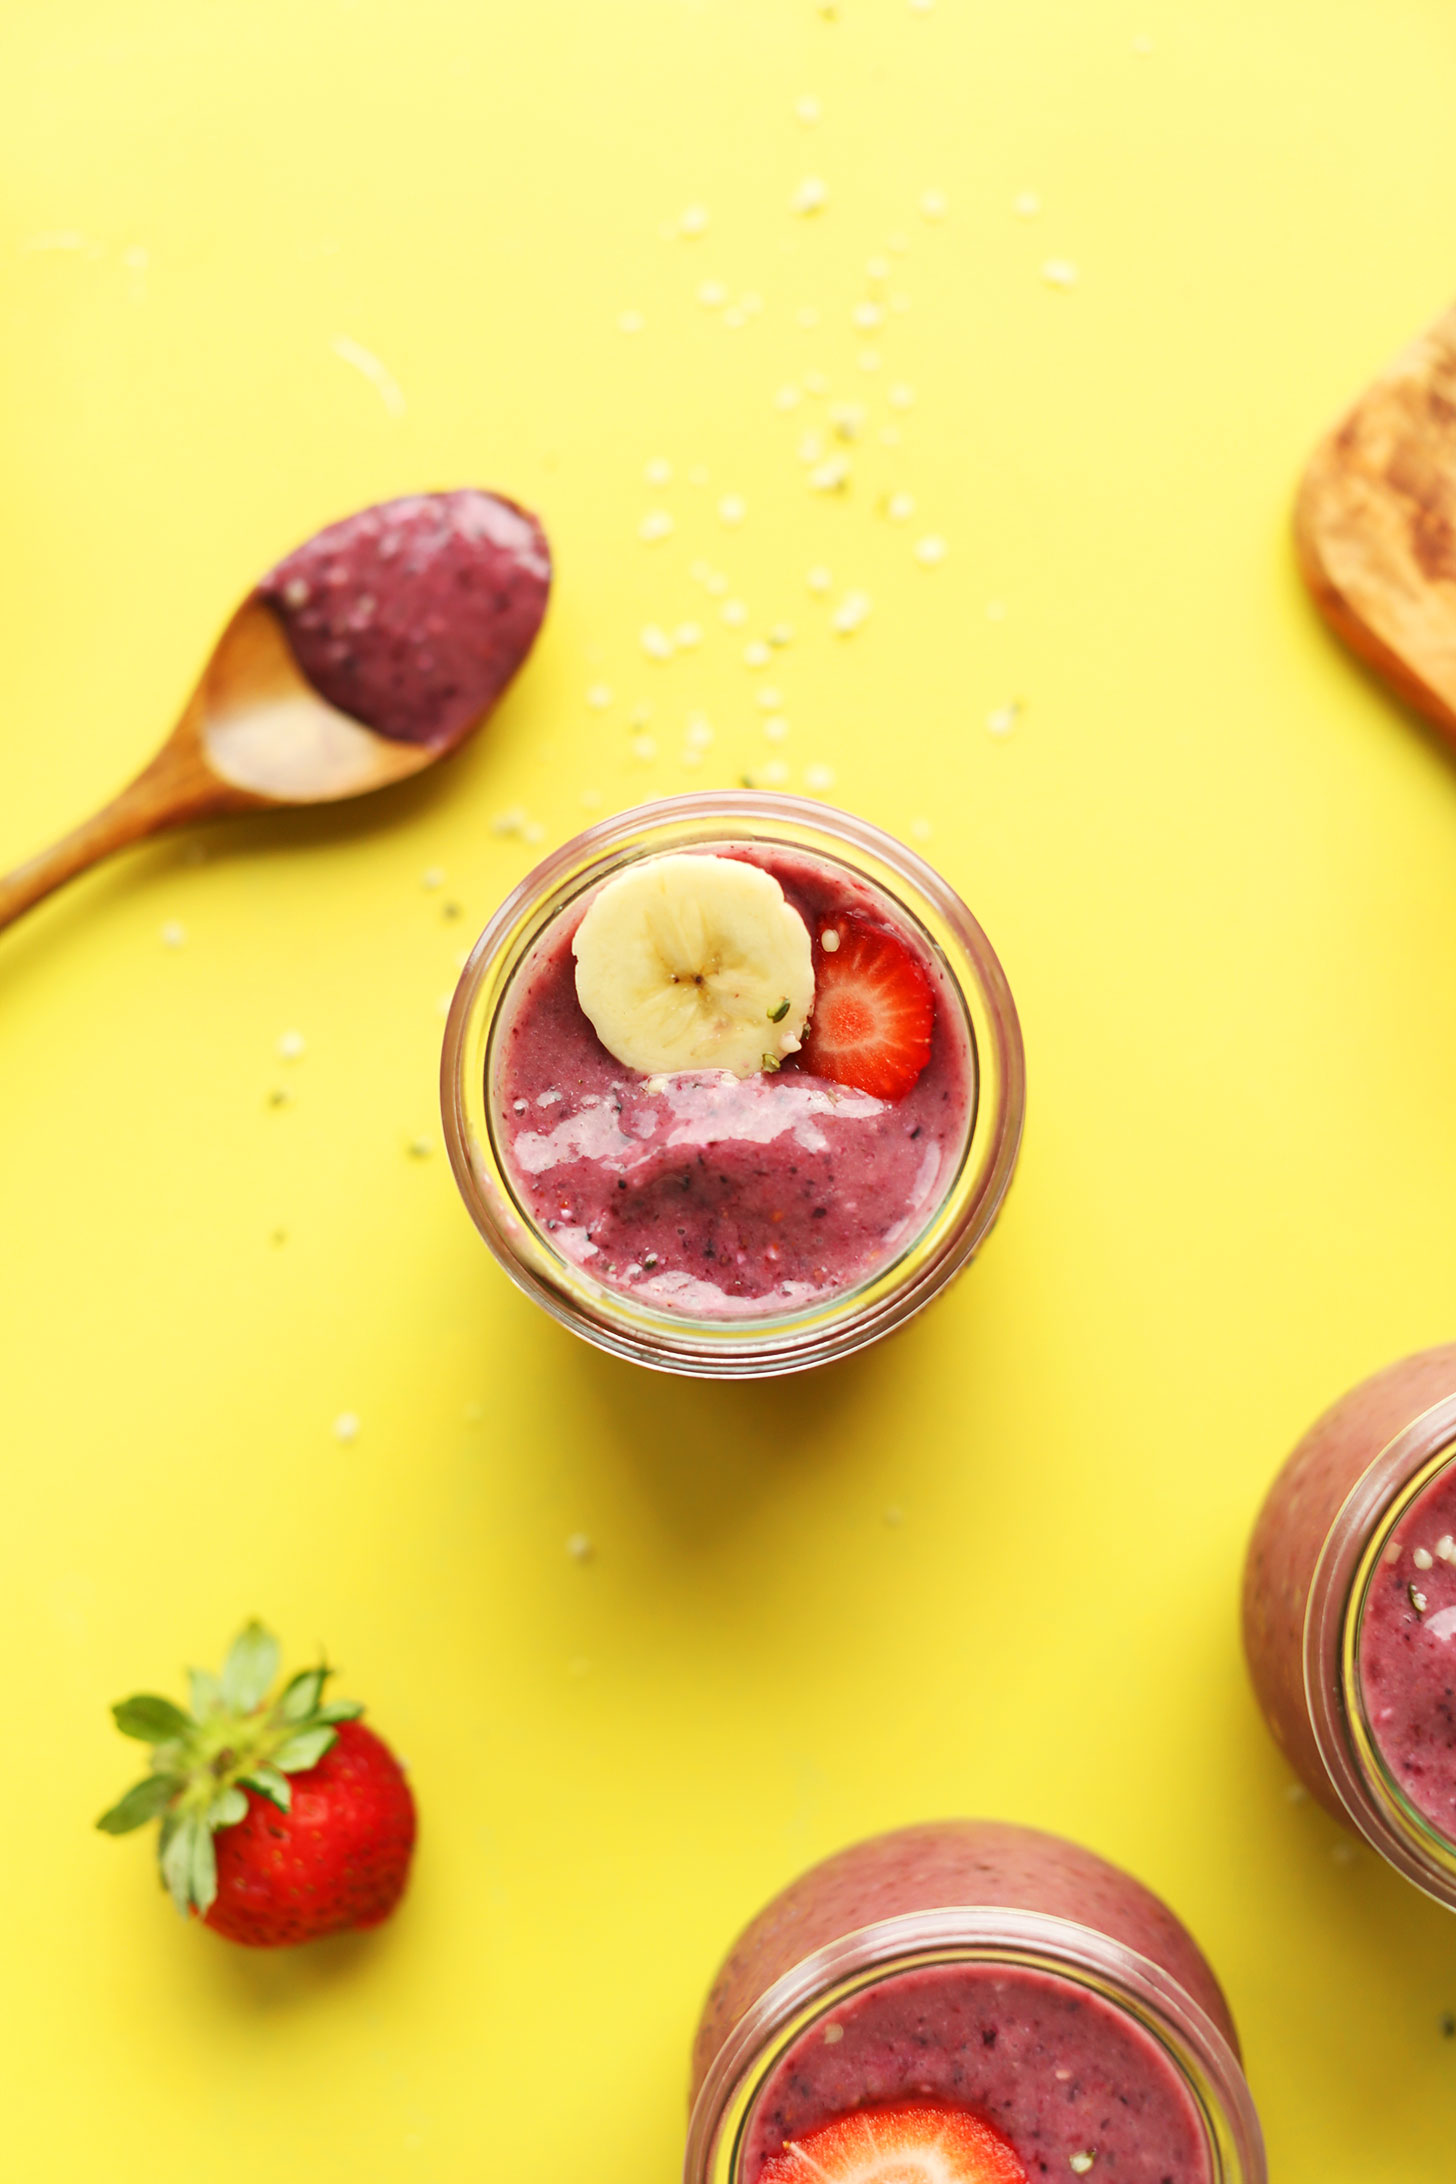 Jar of our antioxidant-packed Banana and Hempseed Berry Pudding